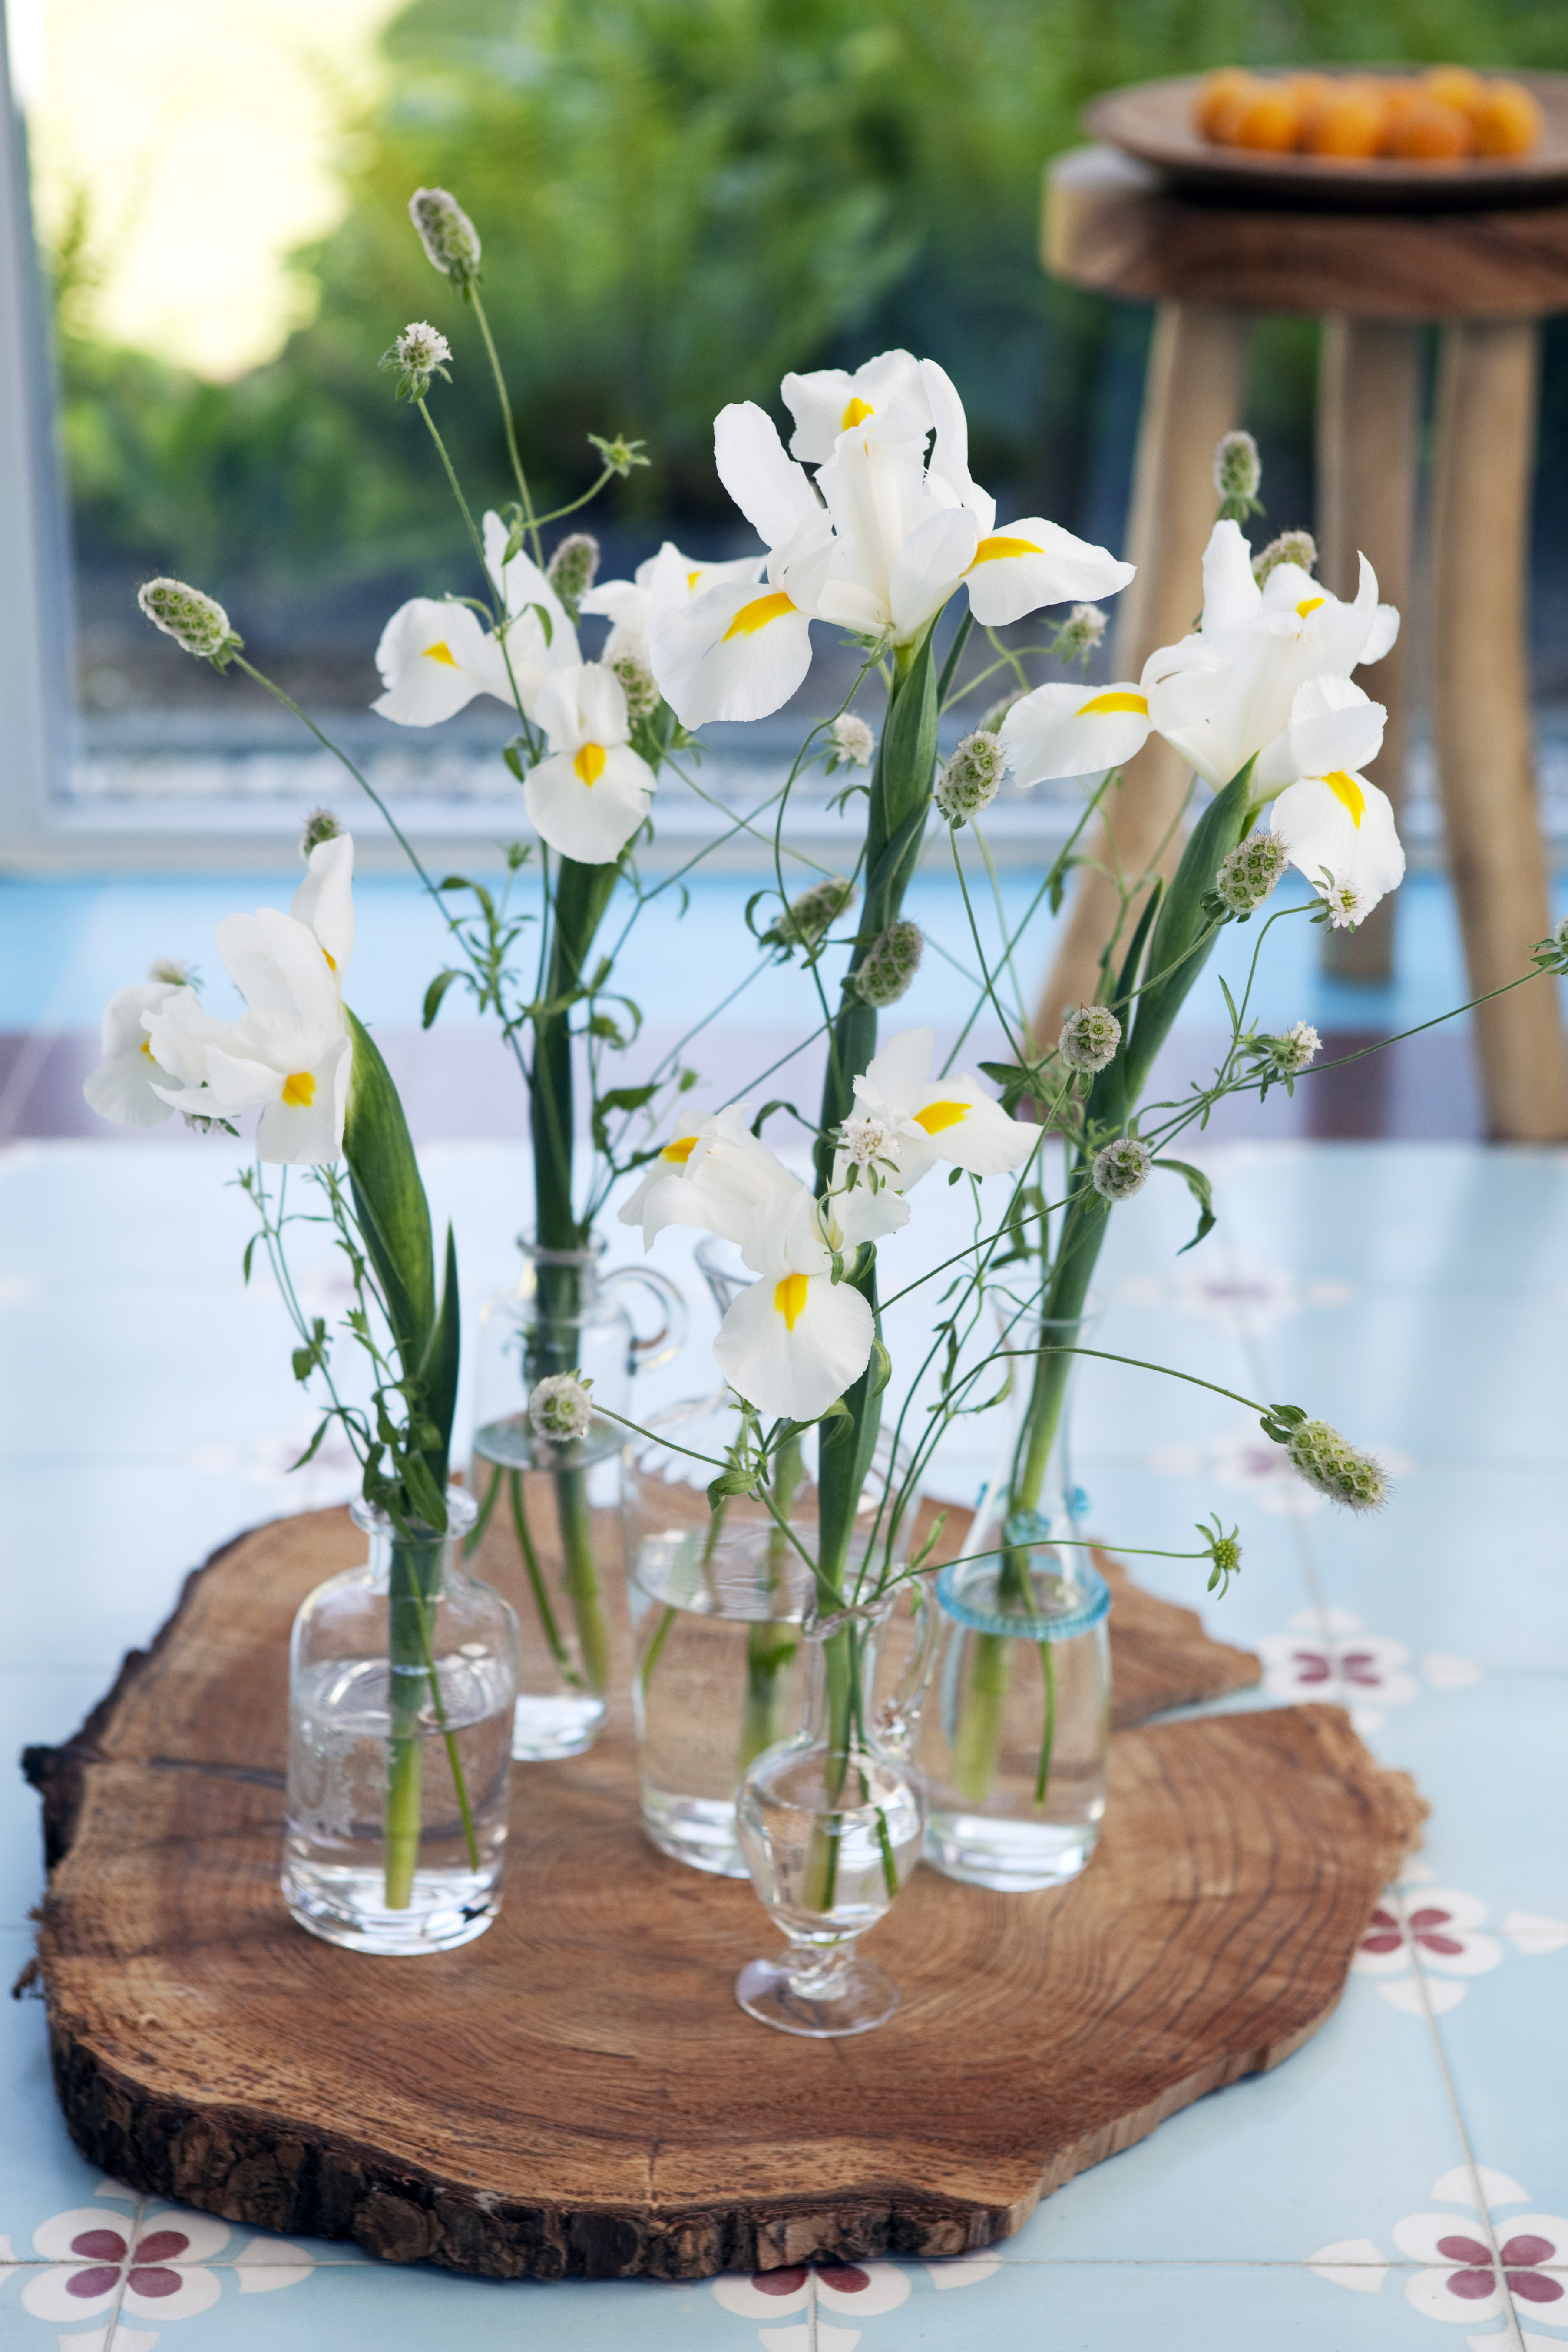 Small is beautiful: Mini vases | Funny how flowers do that